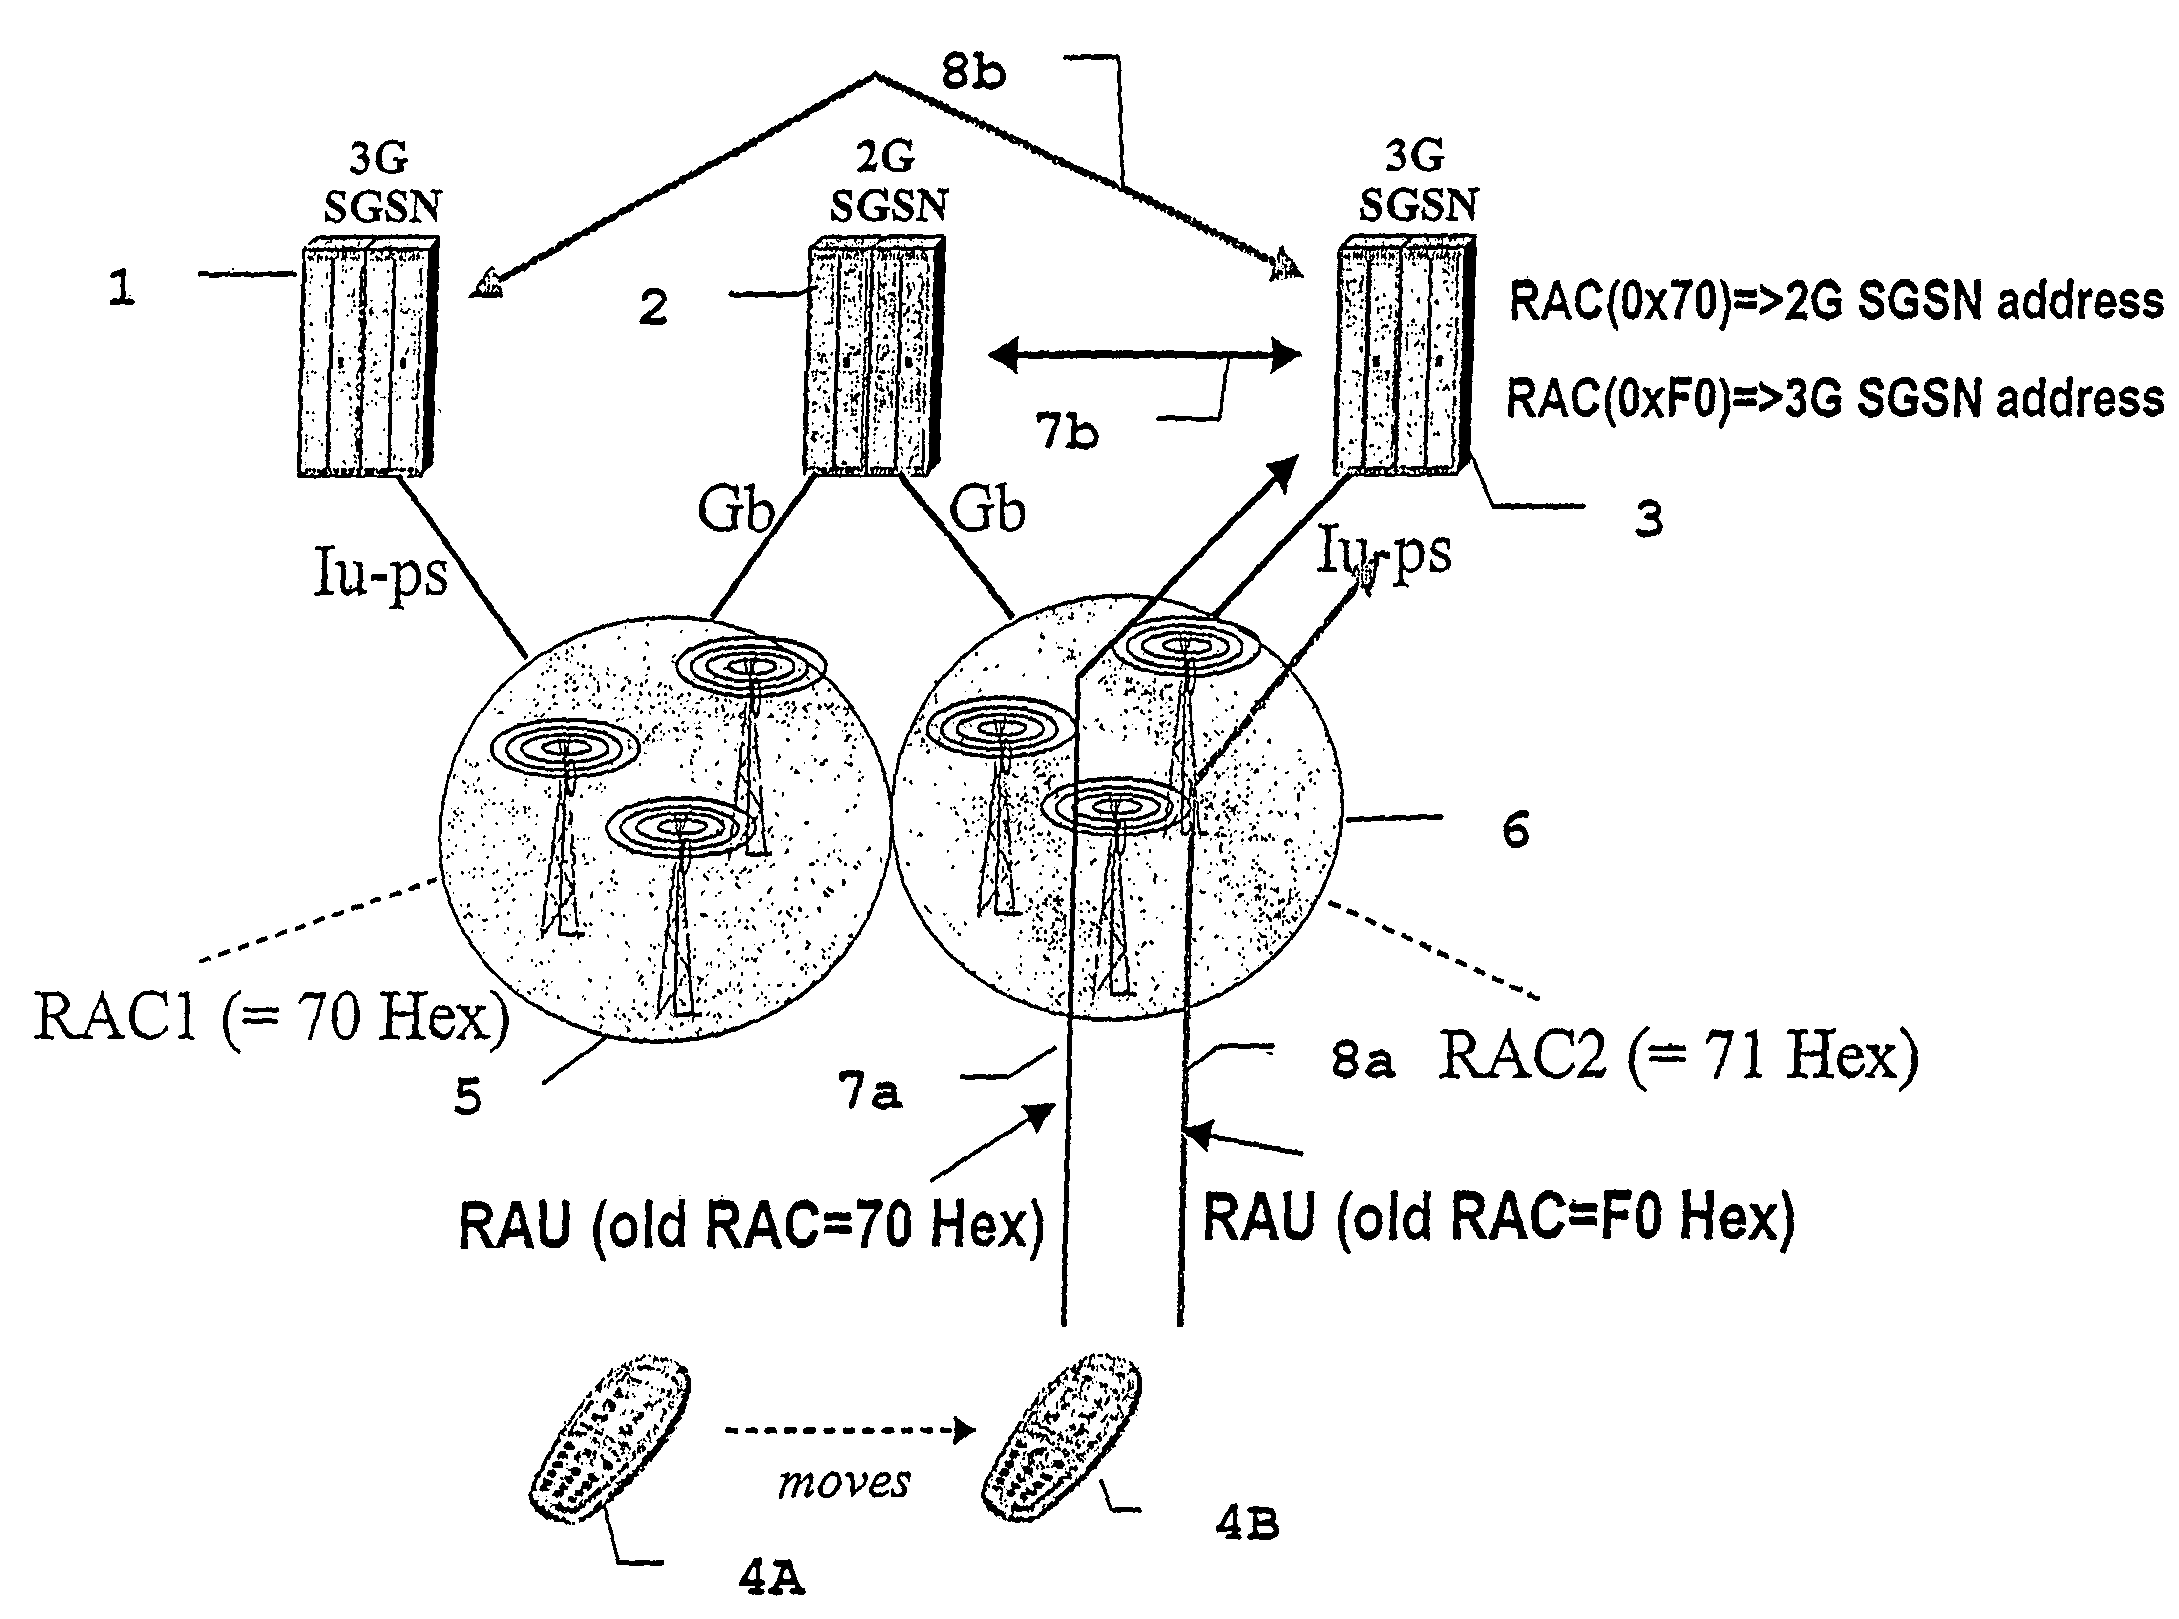 Method of performing an area update for a terminal equipment in a communication network